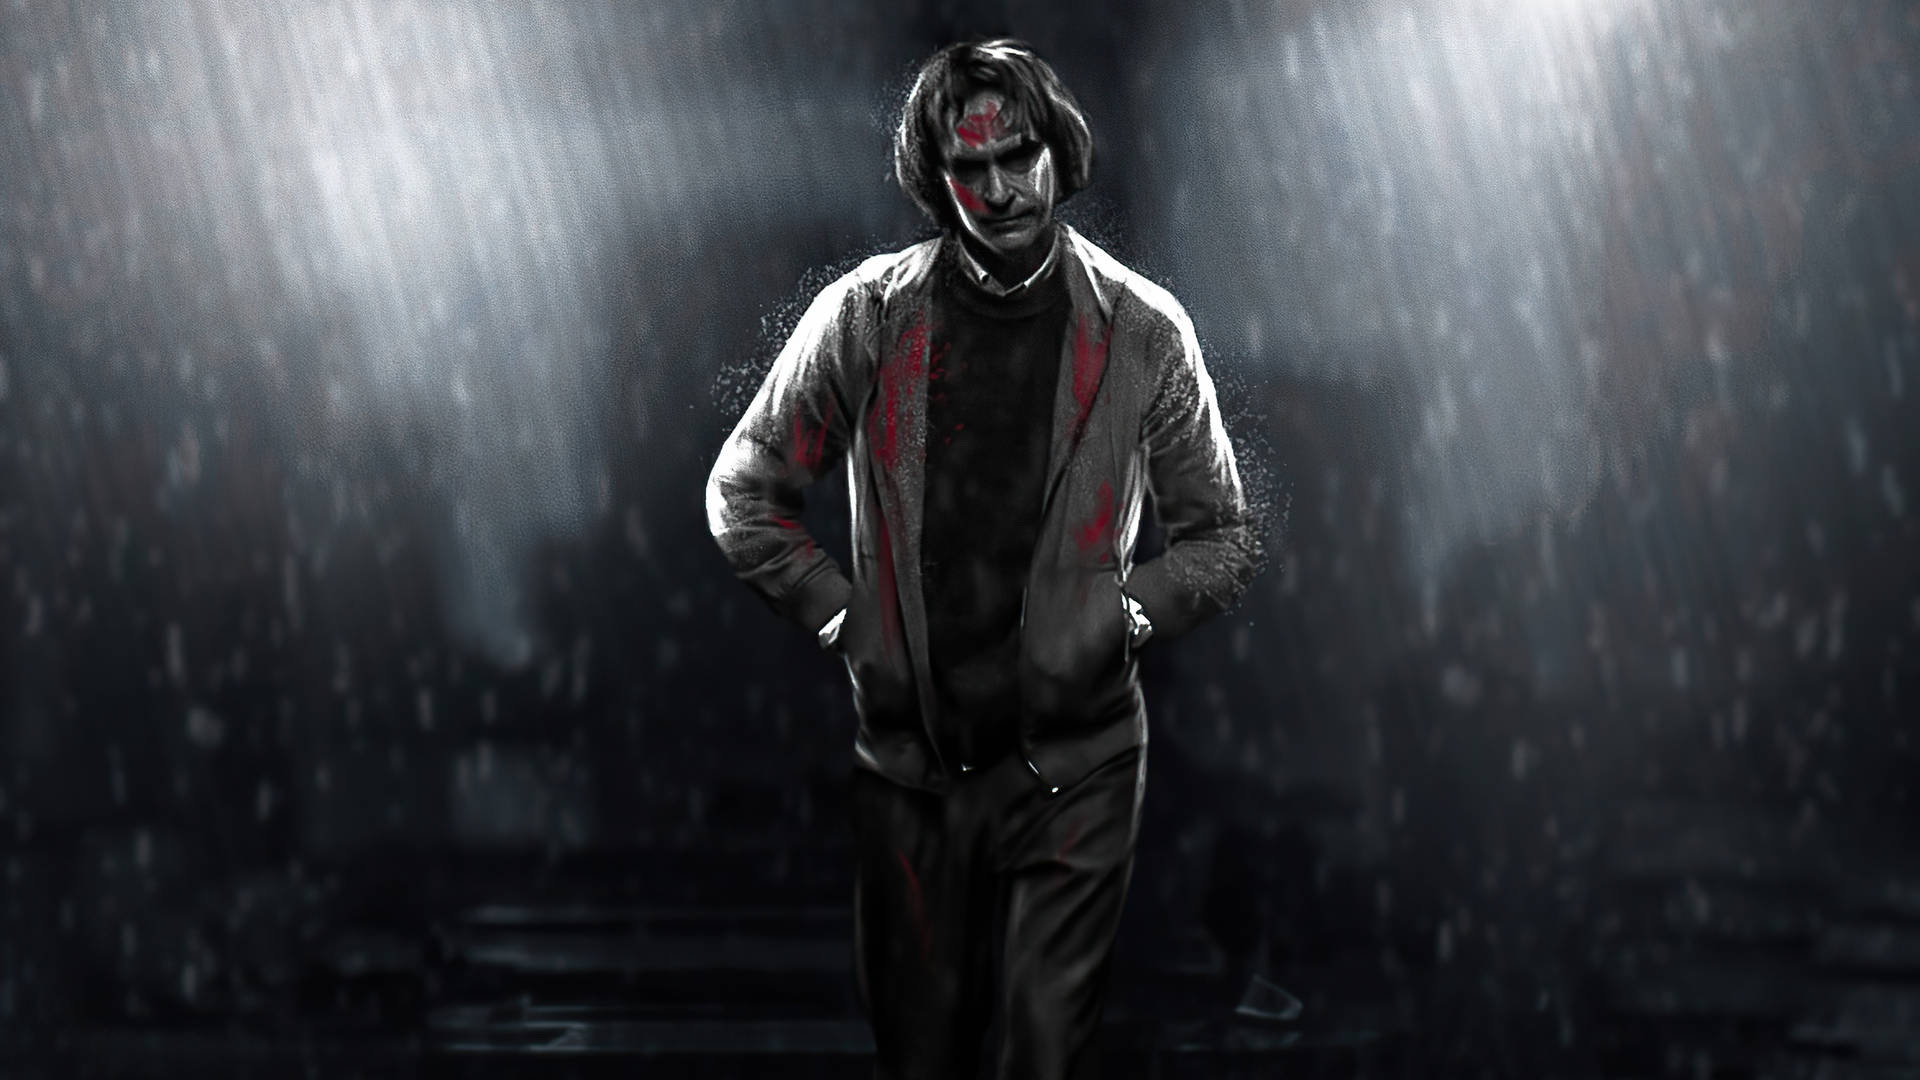 Black Ultra Hd Joker With Blood Stains Background